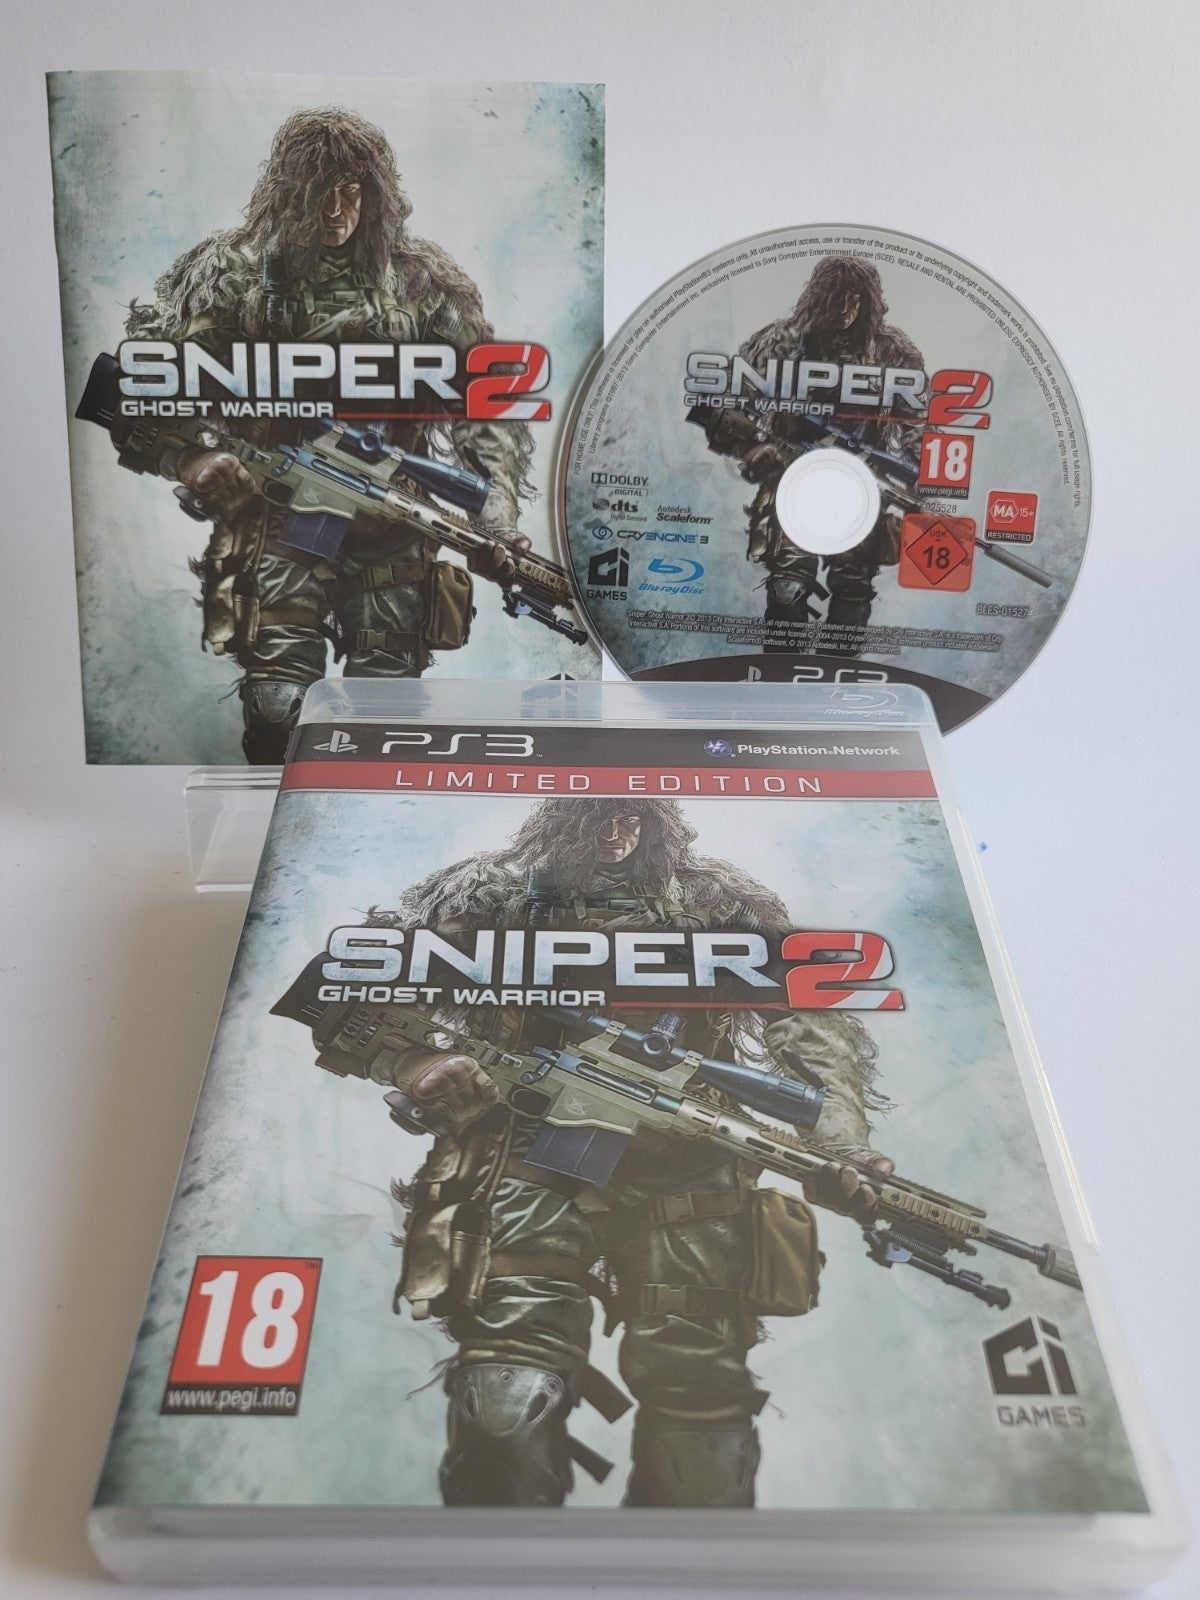 Sniper Ghost Warrior 2 Limited Edition Playstation 3